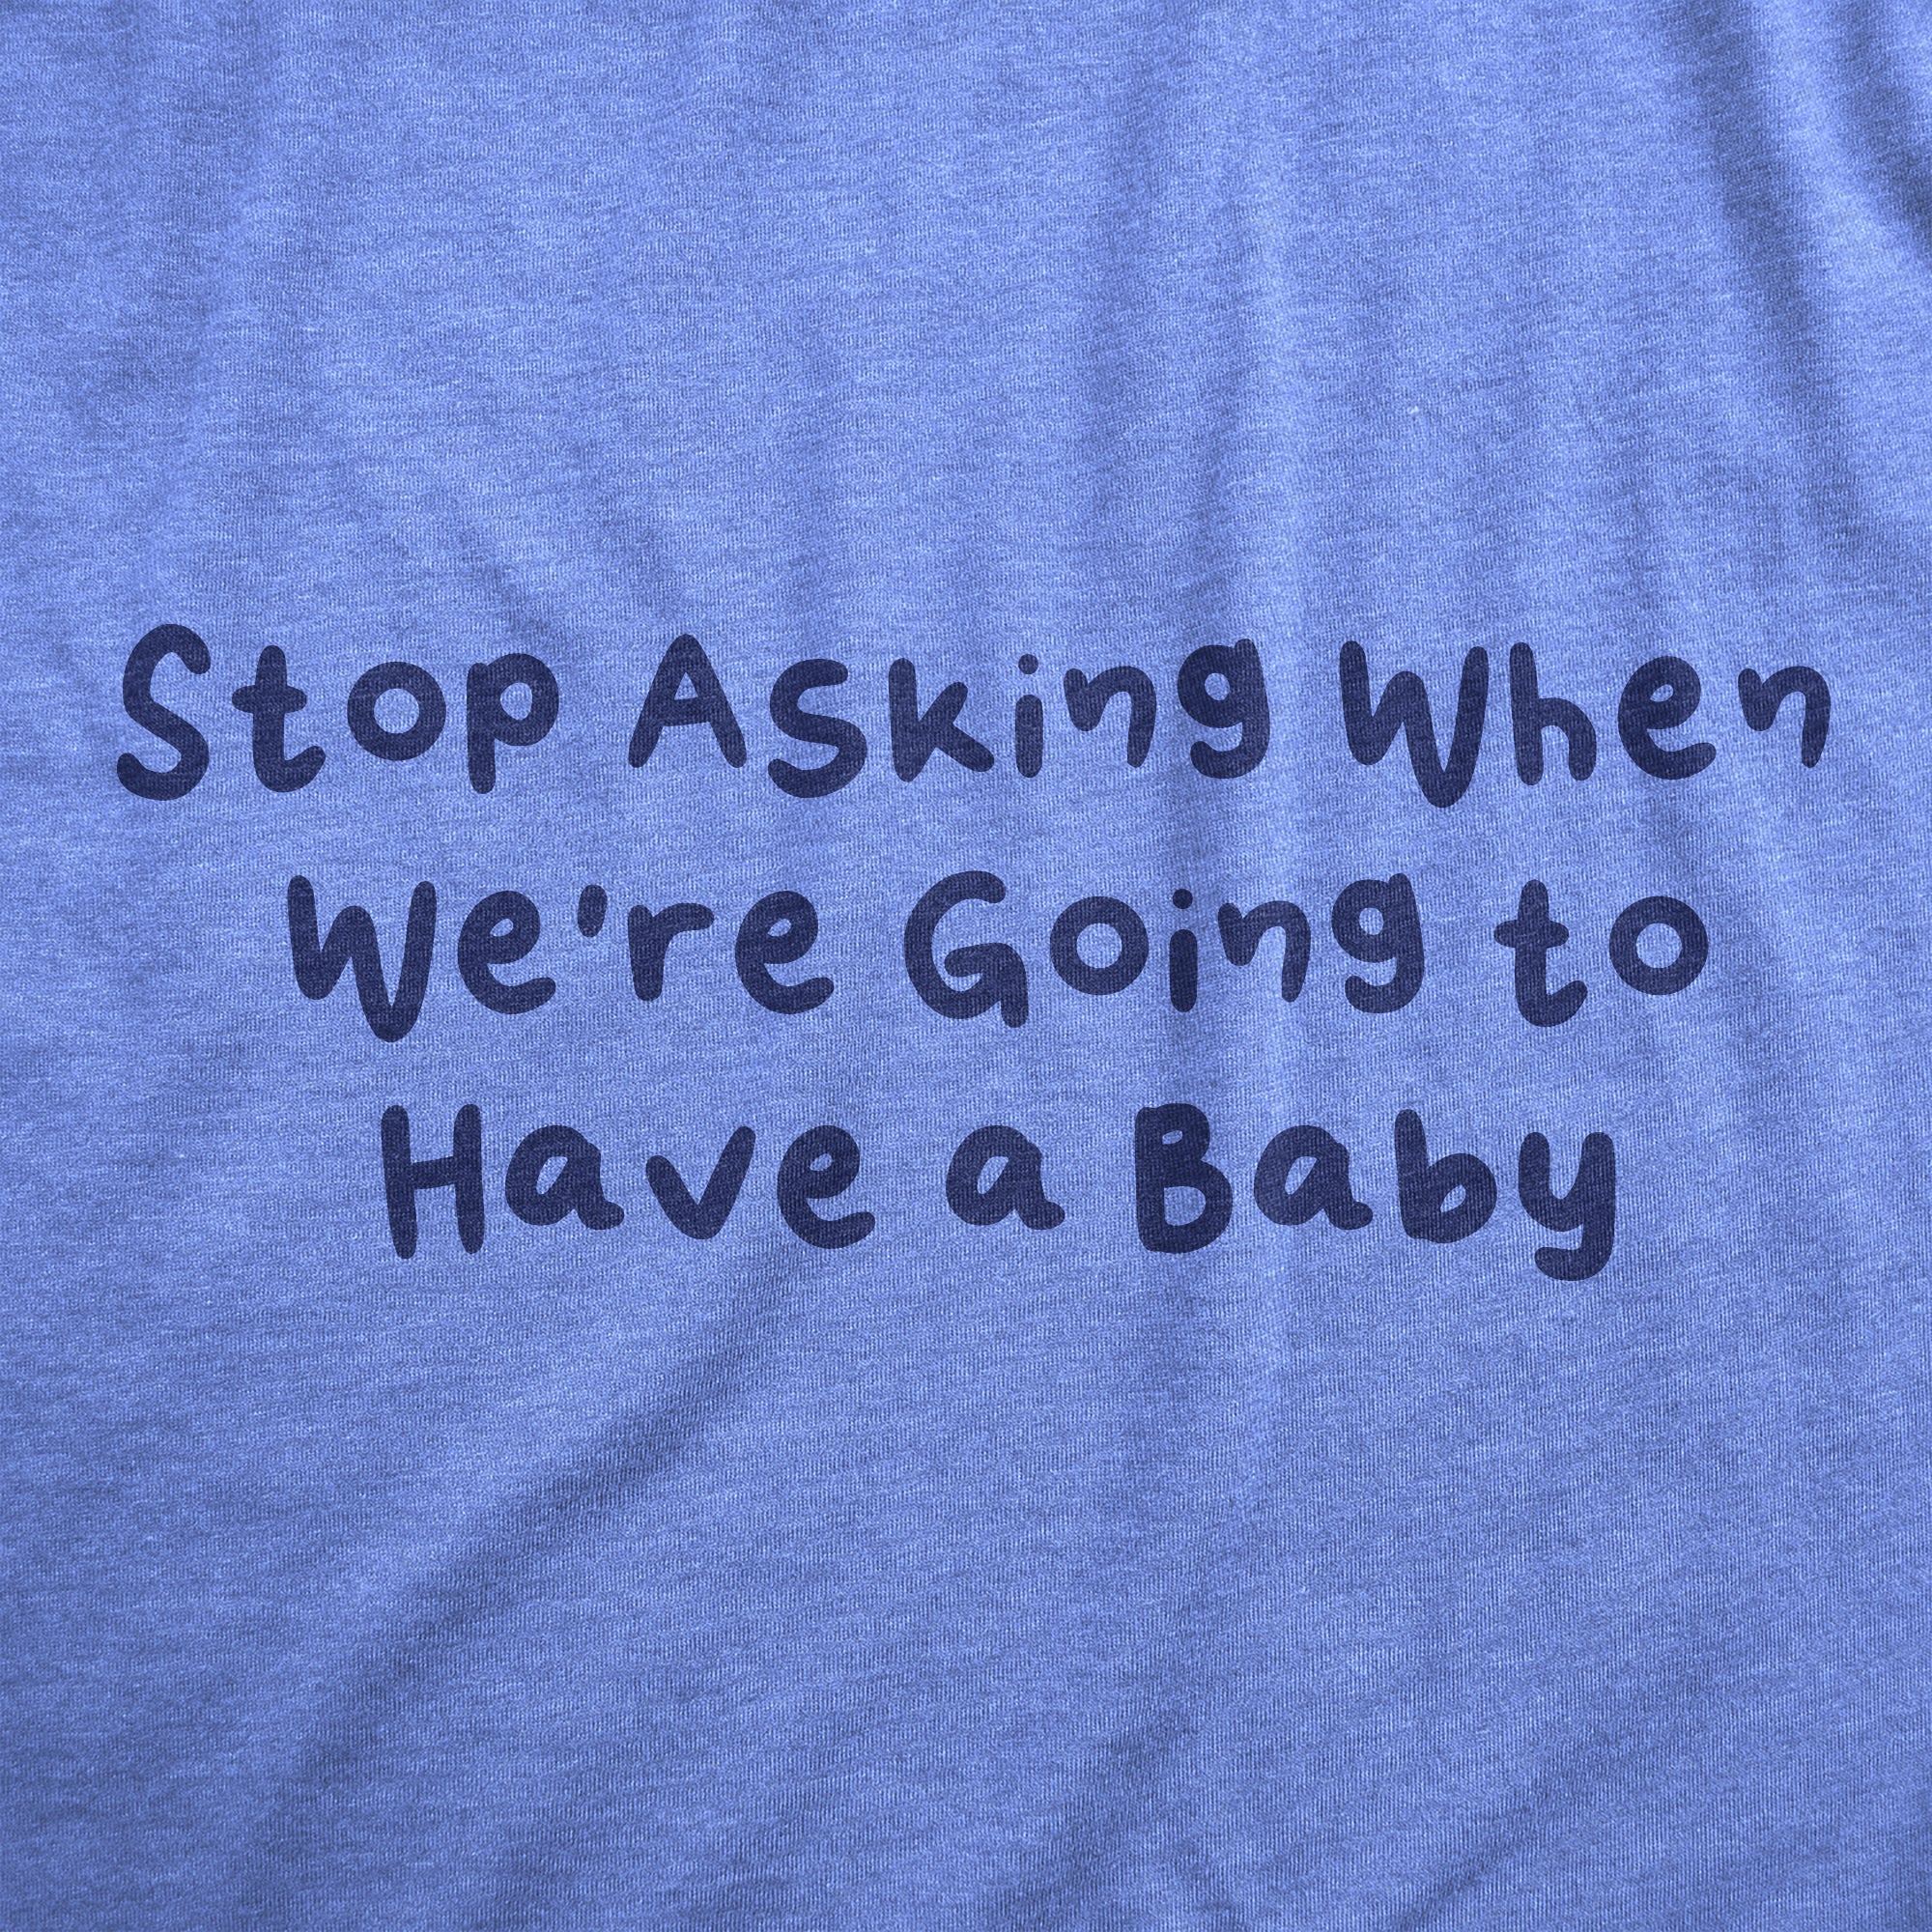 Funny Light Heather Blue - ASKING Stop Asking When Were Going To Have A Baby Maternity T Shirt Nerdy Sarcastic Tee